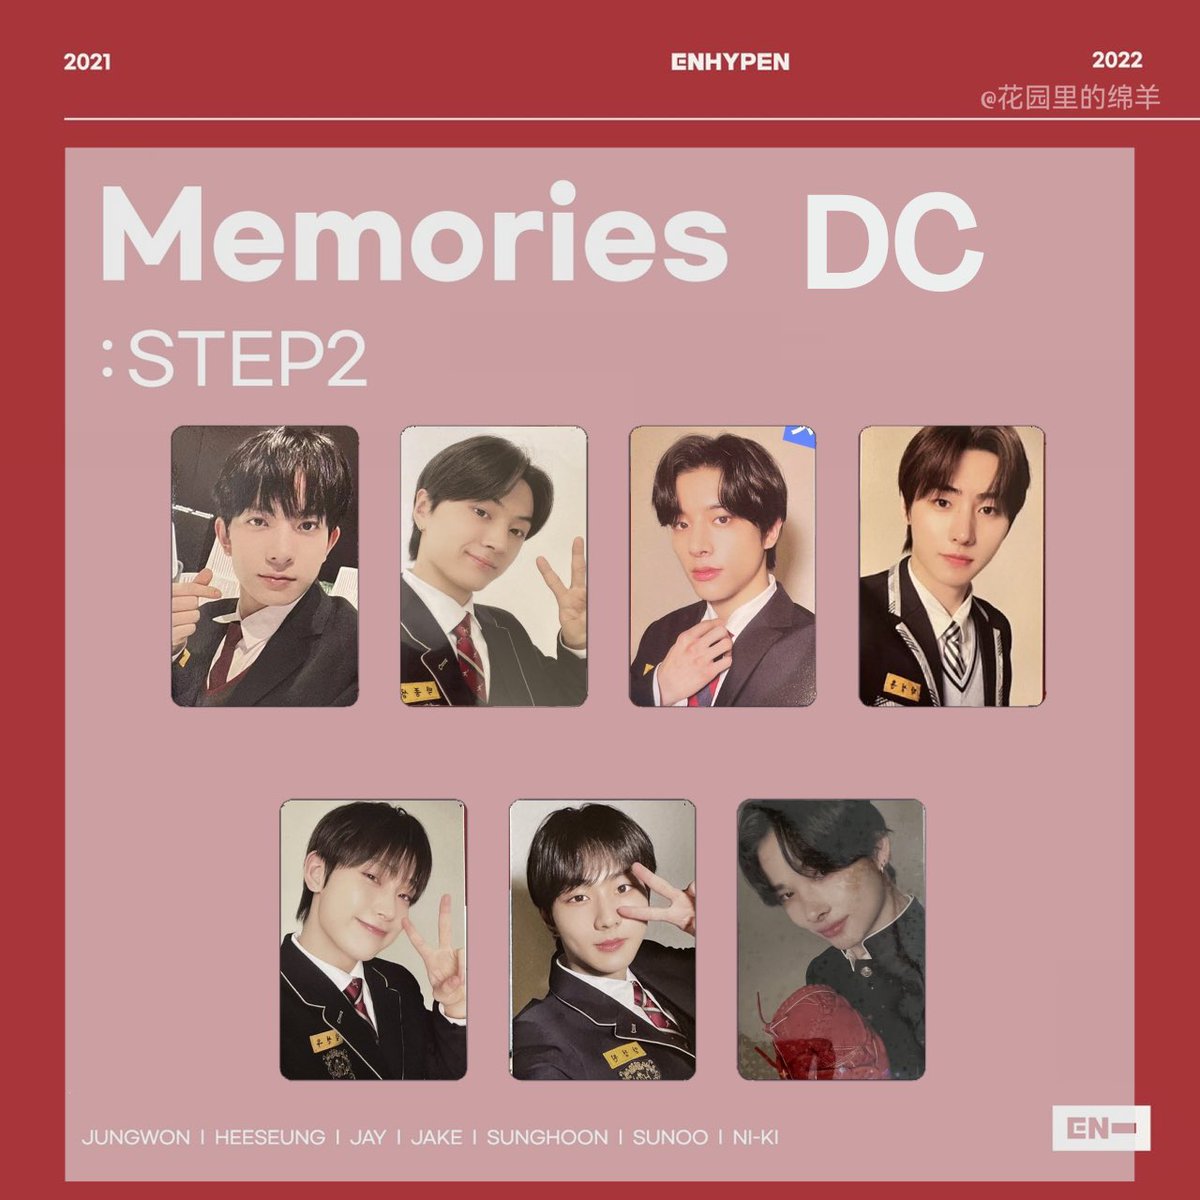 Enhypen [MEMORIES: Step 2] Digital Code Version Photocard Template 

Jungwon Heeseung Jay Jake Sunghoon Sunoo Niki 
#ENHYPEN #MEMORIES_STEP2
 
ctto.
‼️photo credits to original owners‼️